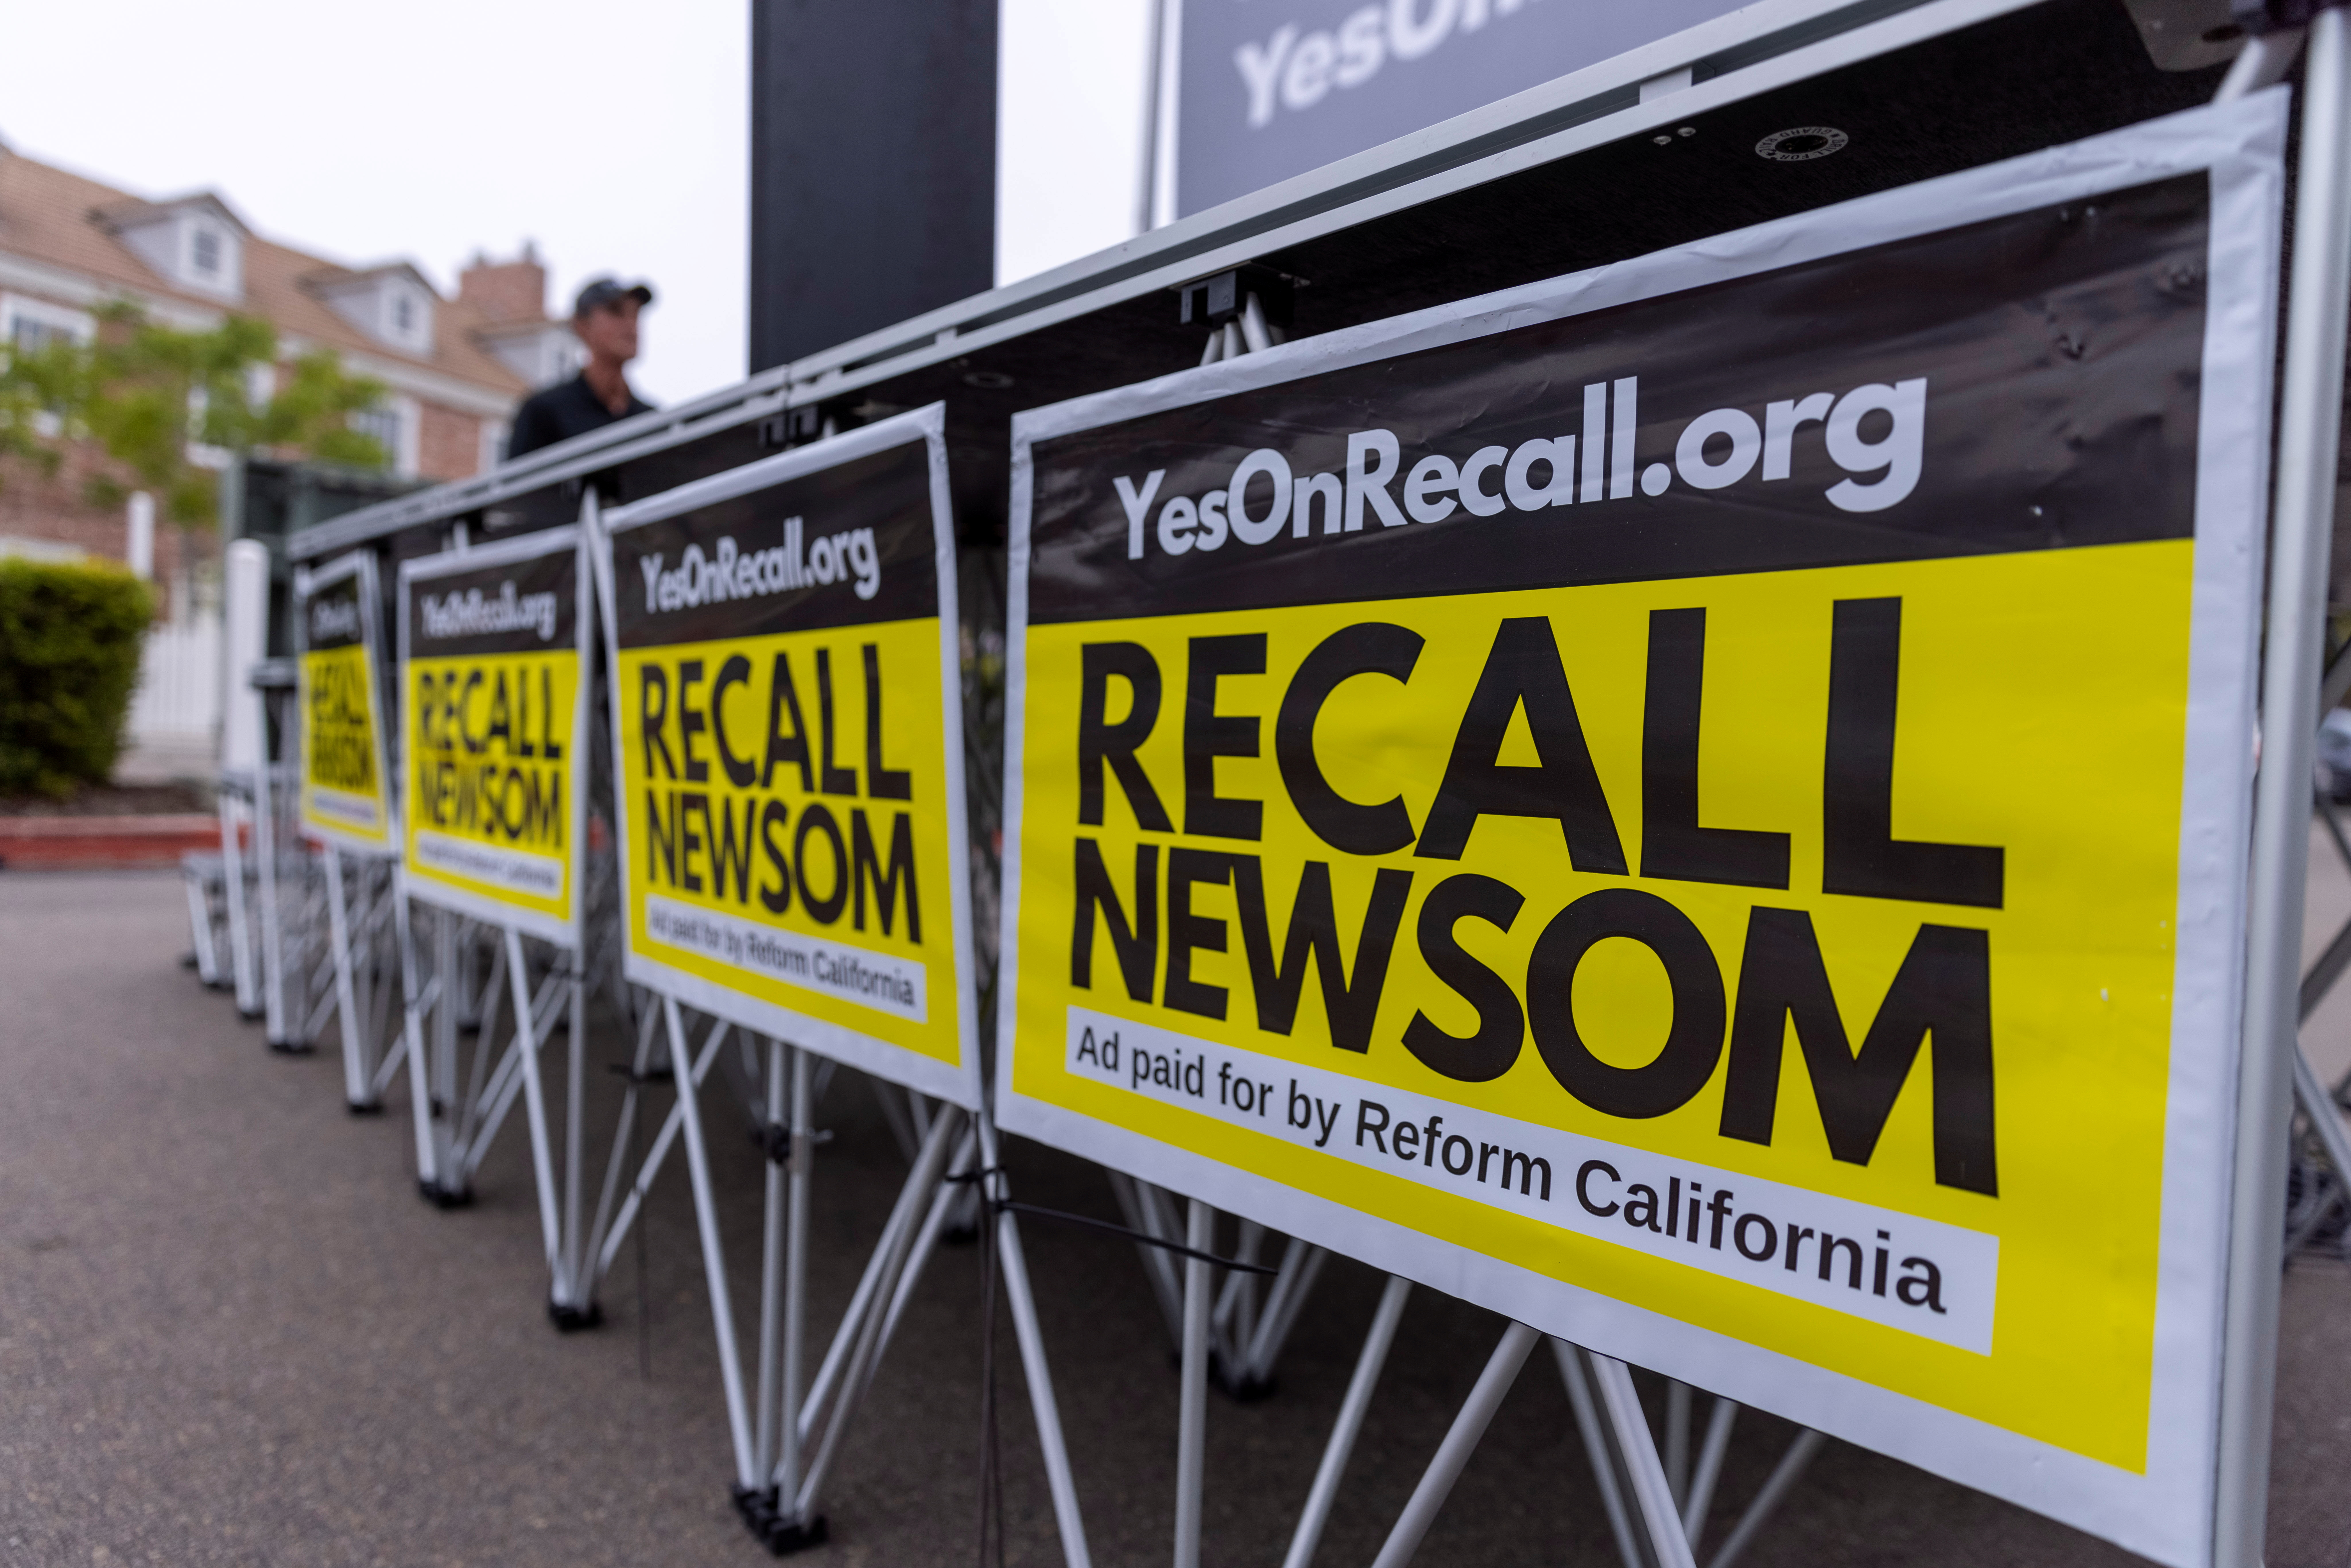 Signs are shown at a rally for the recall campaign of California governor Gavin Newsom in Carlsbad